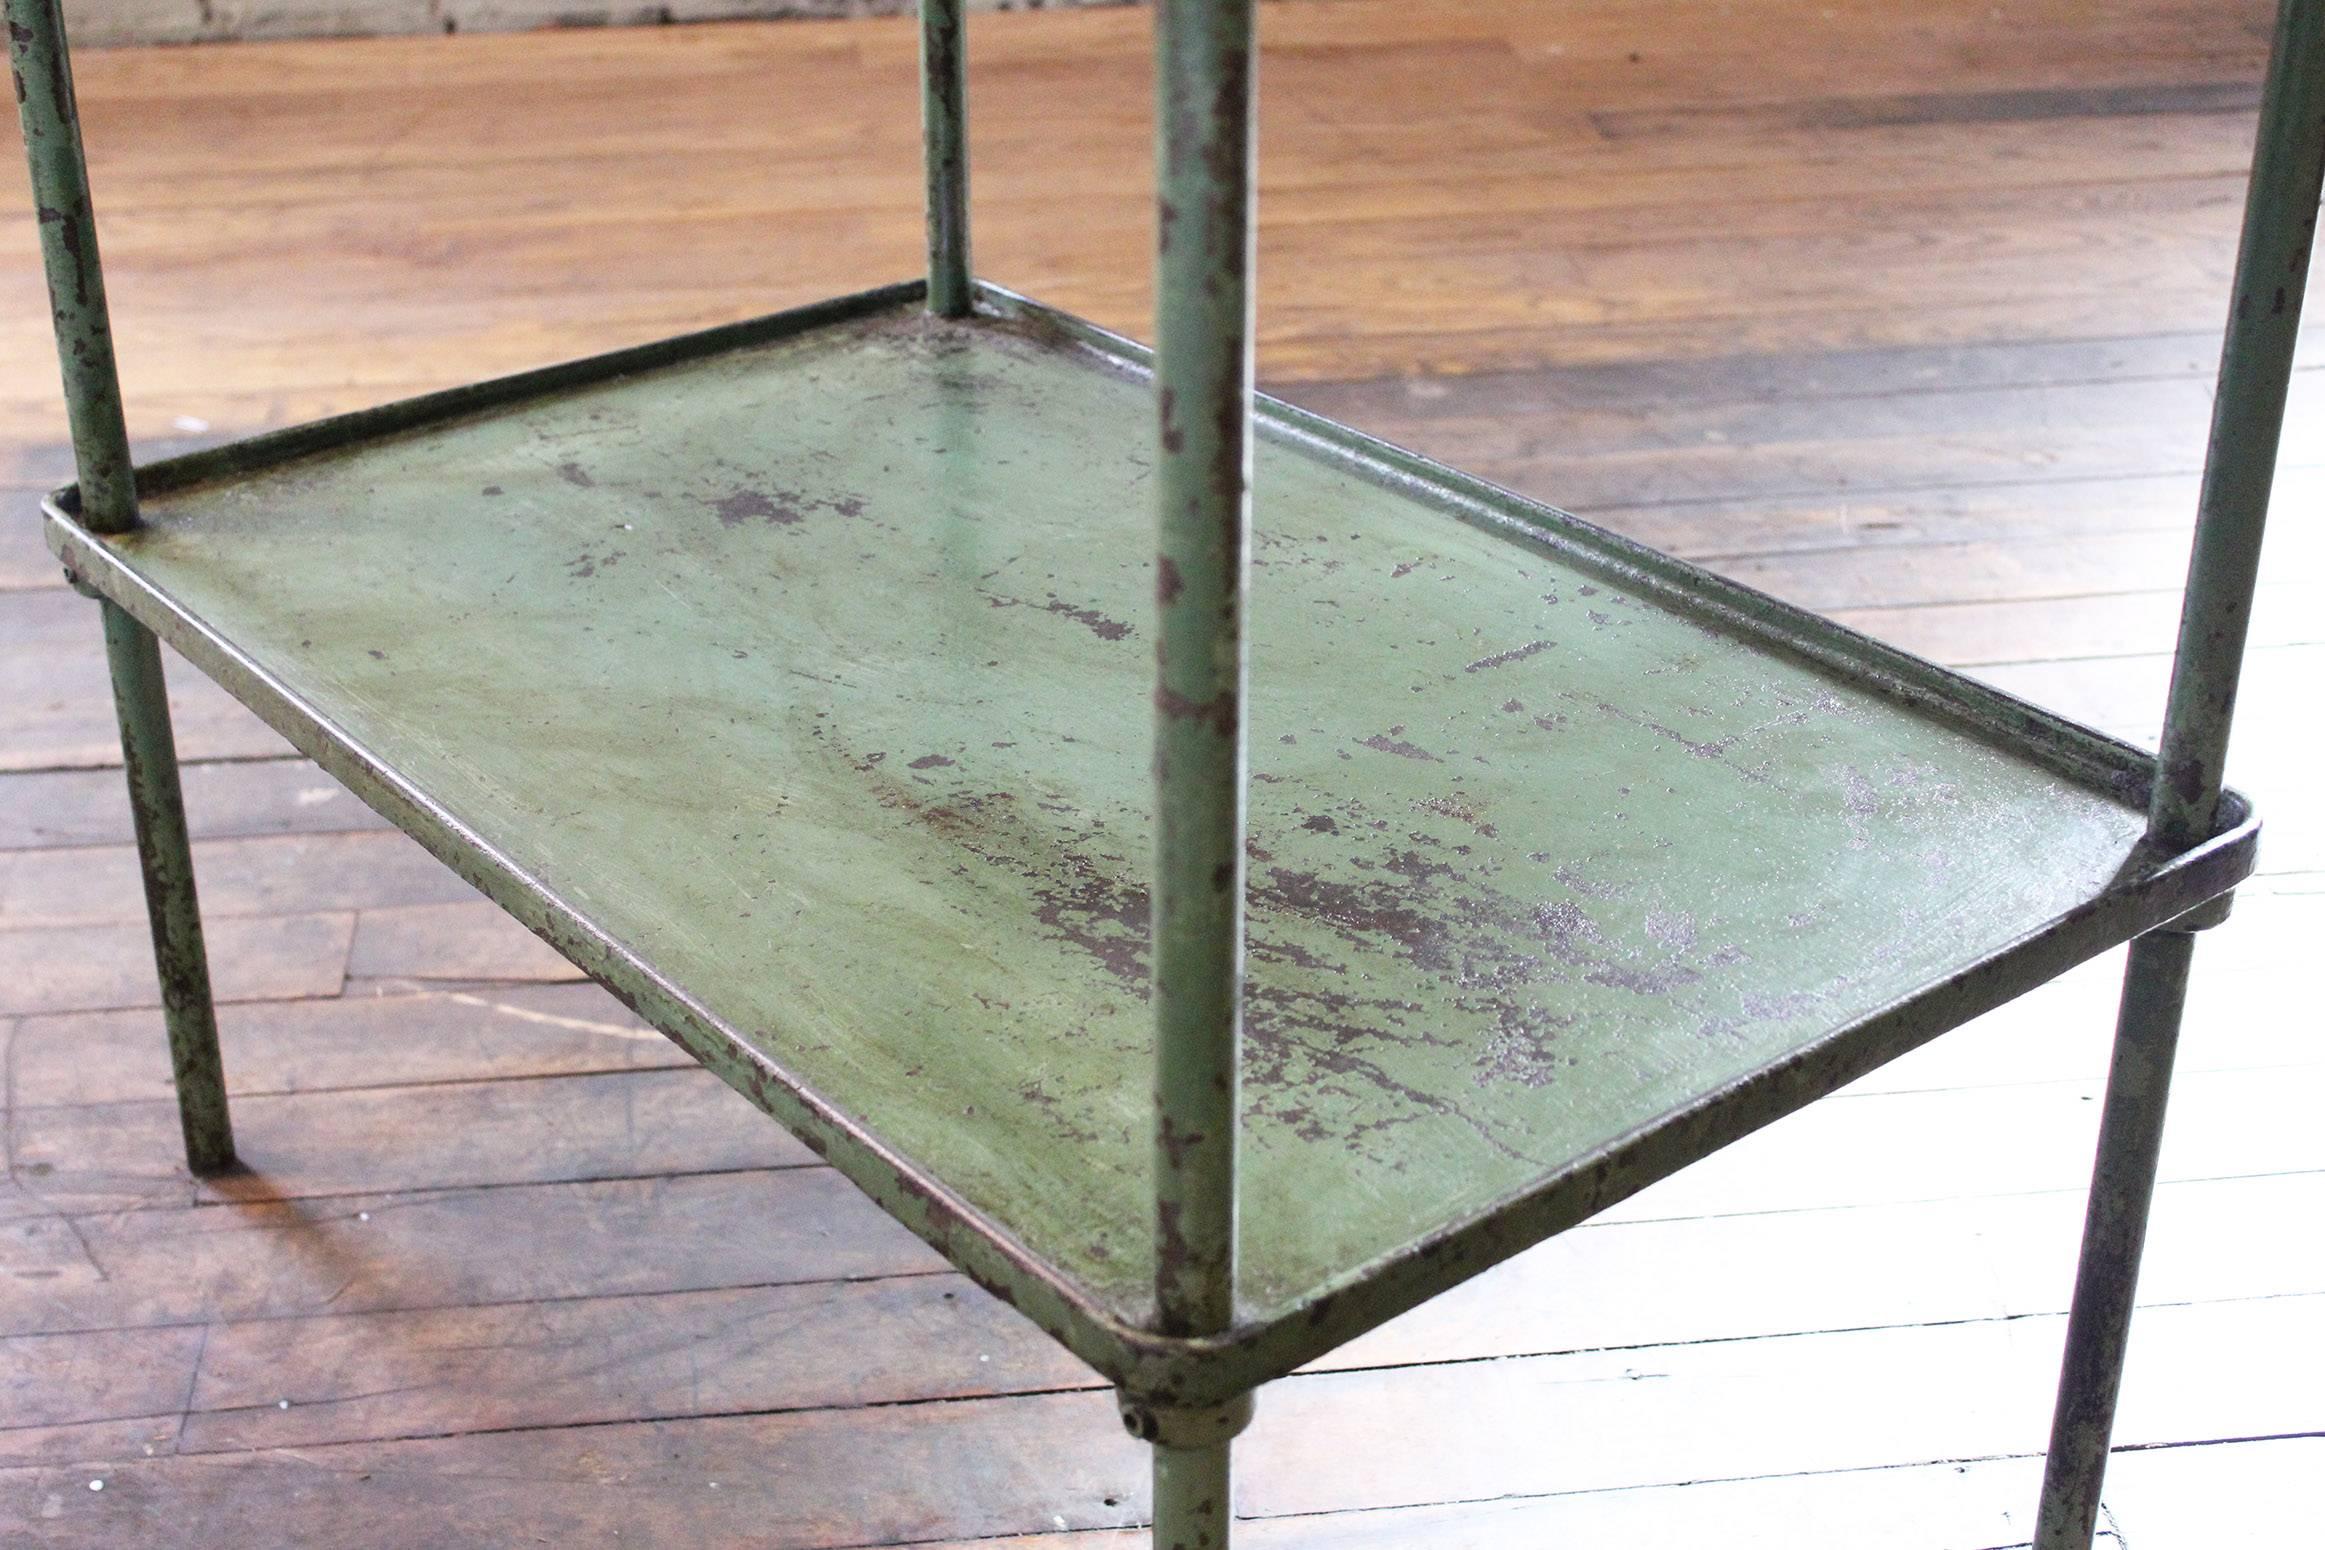 Cast iron vintage Industrial rustic steel two-tier table, bar or storage cart with adjustable shelf. Beautiful patina with worn green paint. Dimensions are 30 1/8" x 19 1/8" x 23 3/8" in Height. Shelf sits at 13".